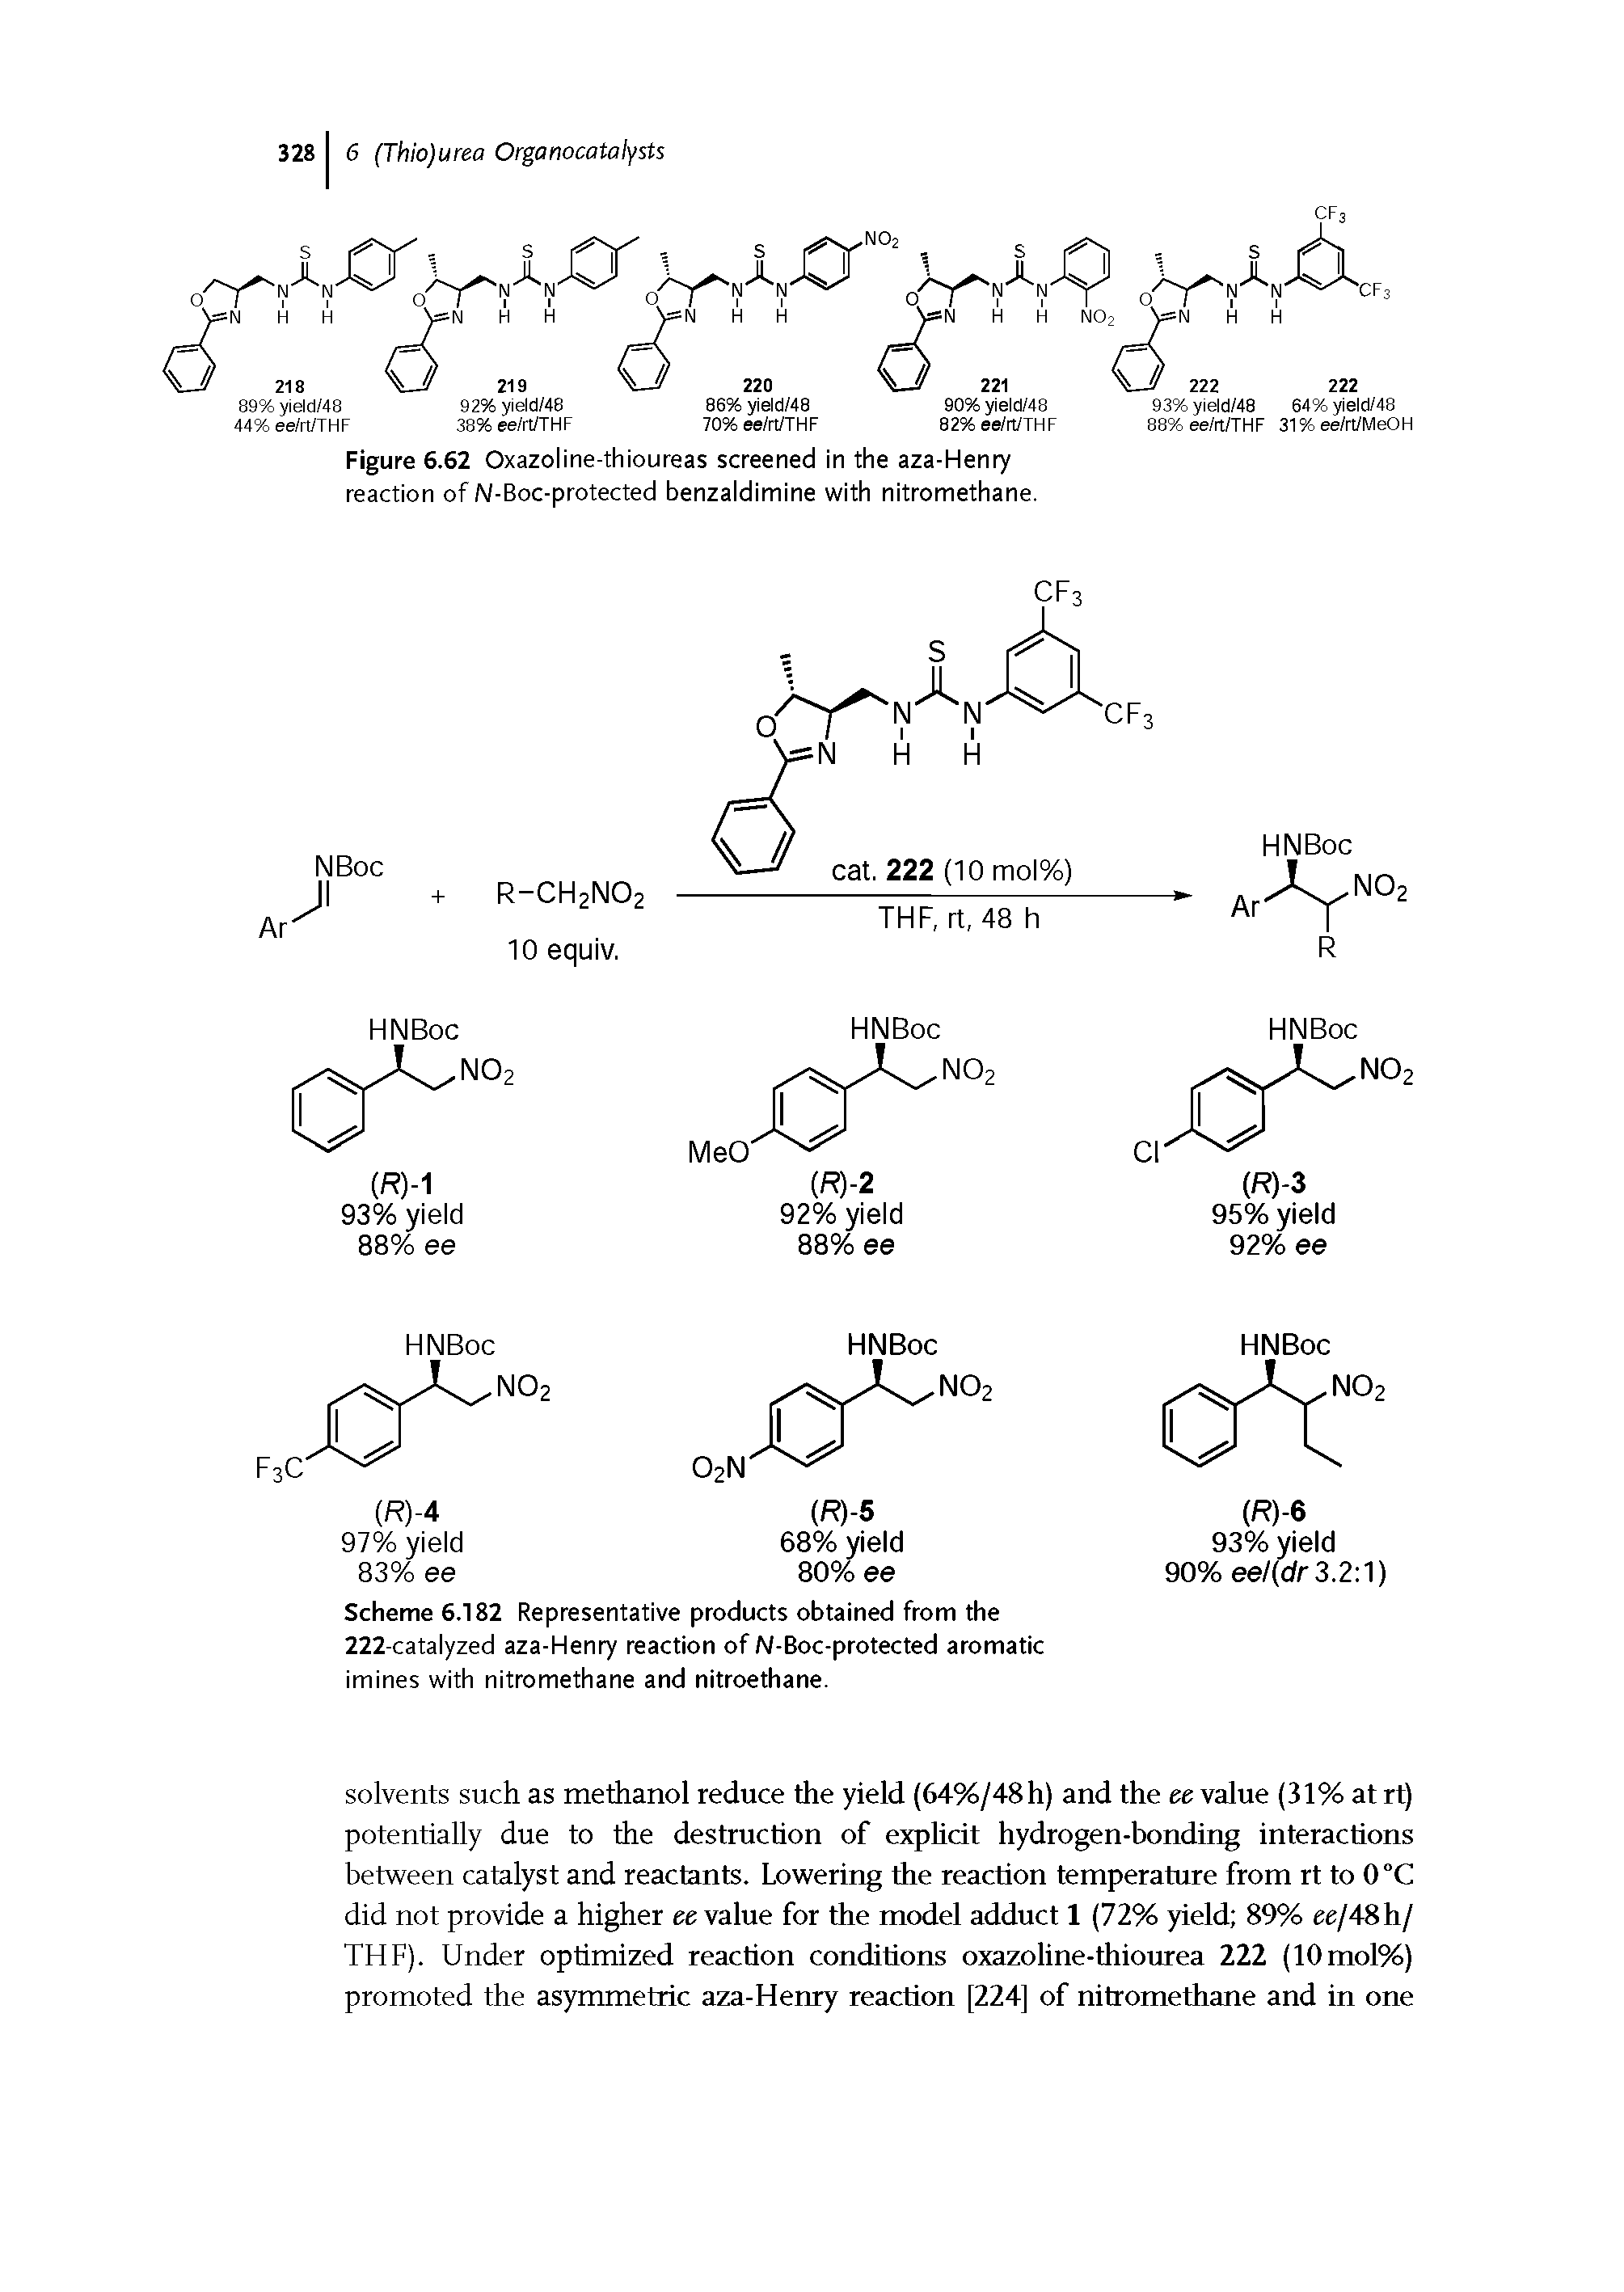 Scheme 6.182 Representative products obtained from the 222-catalyzed aza-Henry reaction of N-Boc-protected aromatic imines with nitromethane and nitroethane.